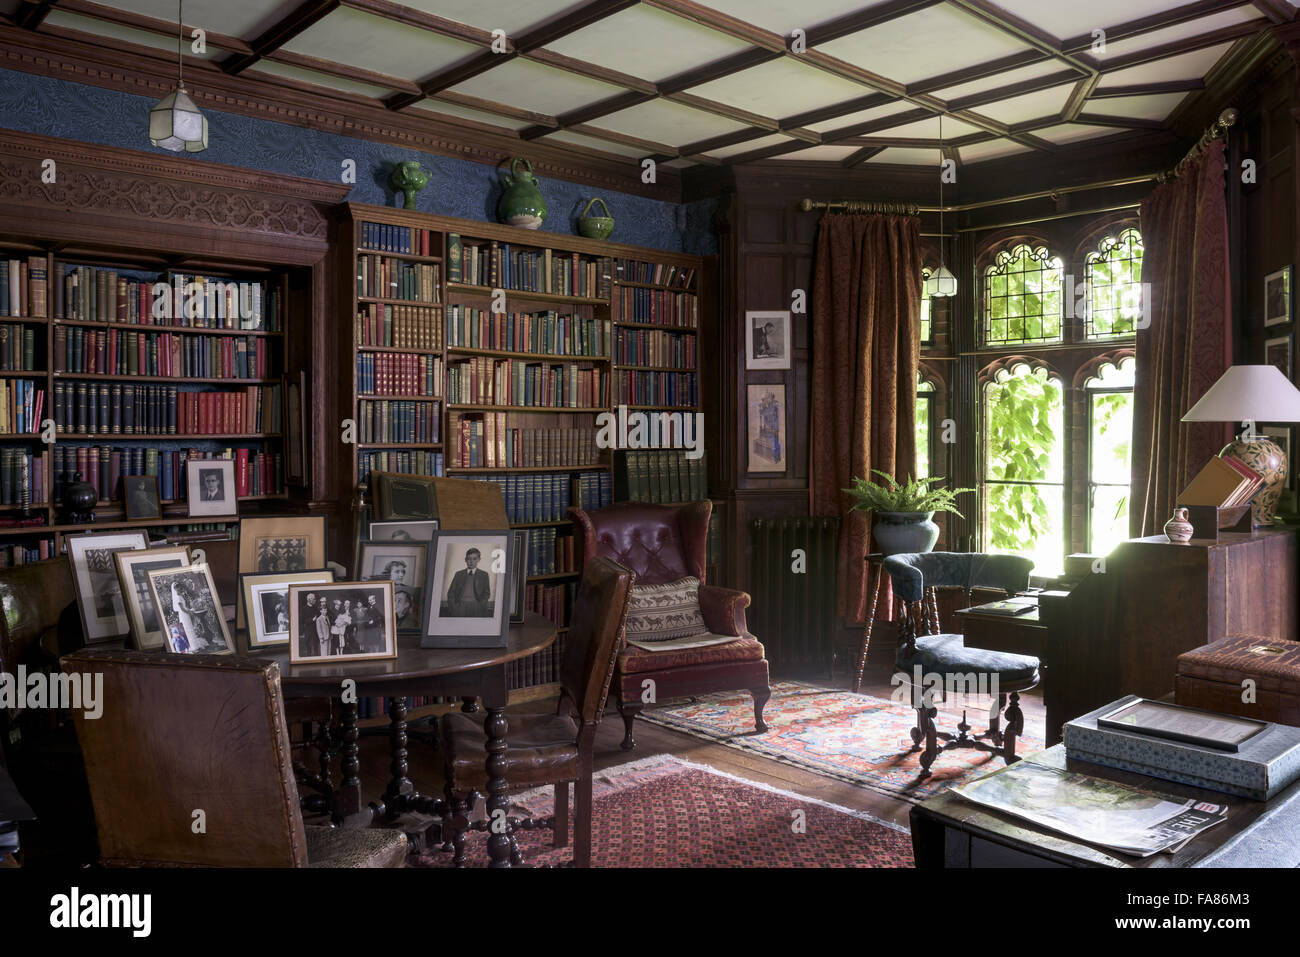 An interior view of Wightwick Manor and Gardens, West Midlands. Wightwick Manor was begun in 1887 in the 'Old English' style, and has a superb collection of William Morris fabrics and Pre-Raphaelite paintings. Stock Photo